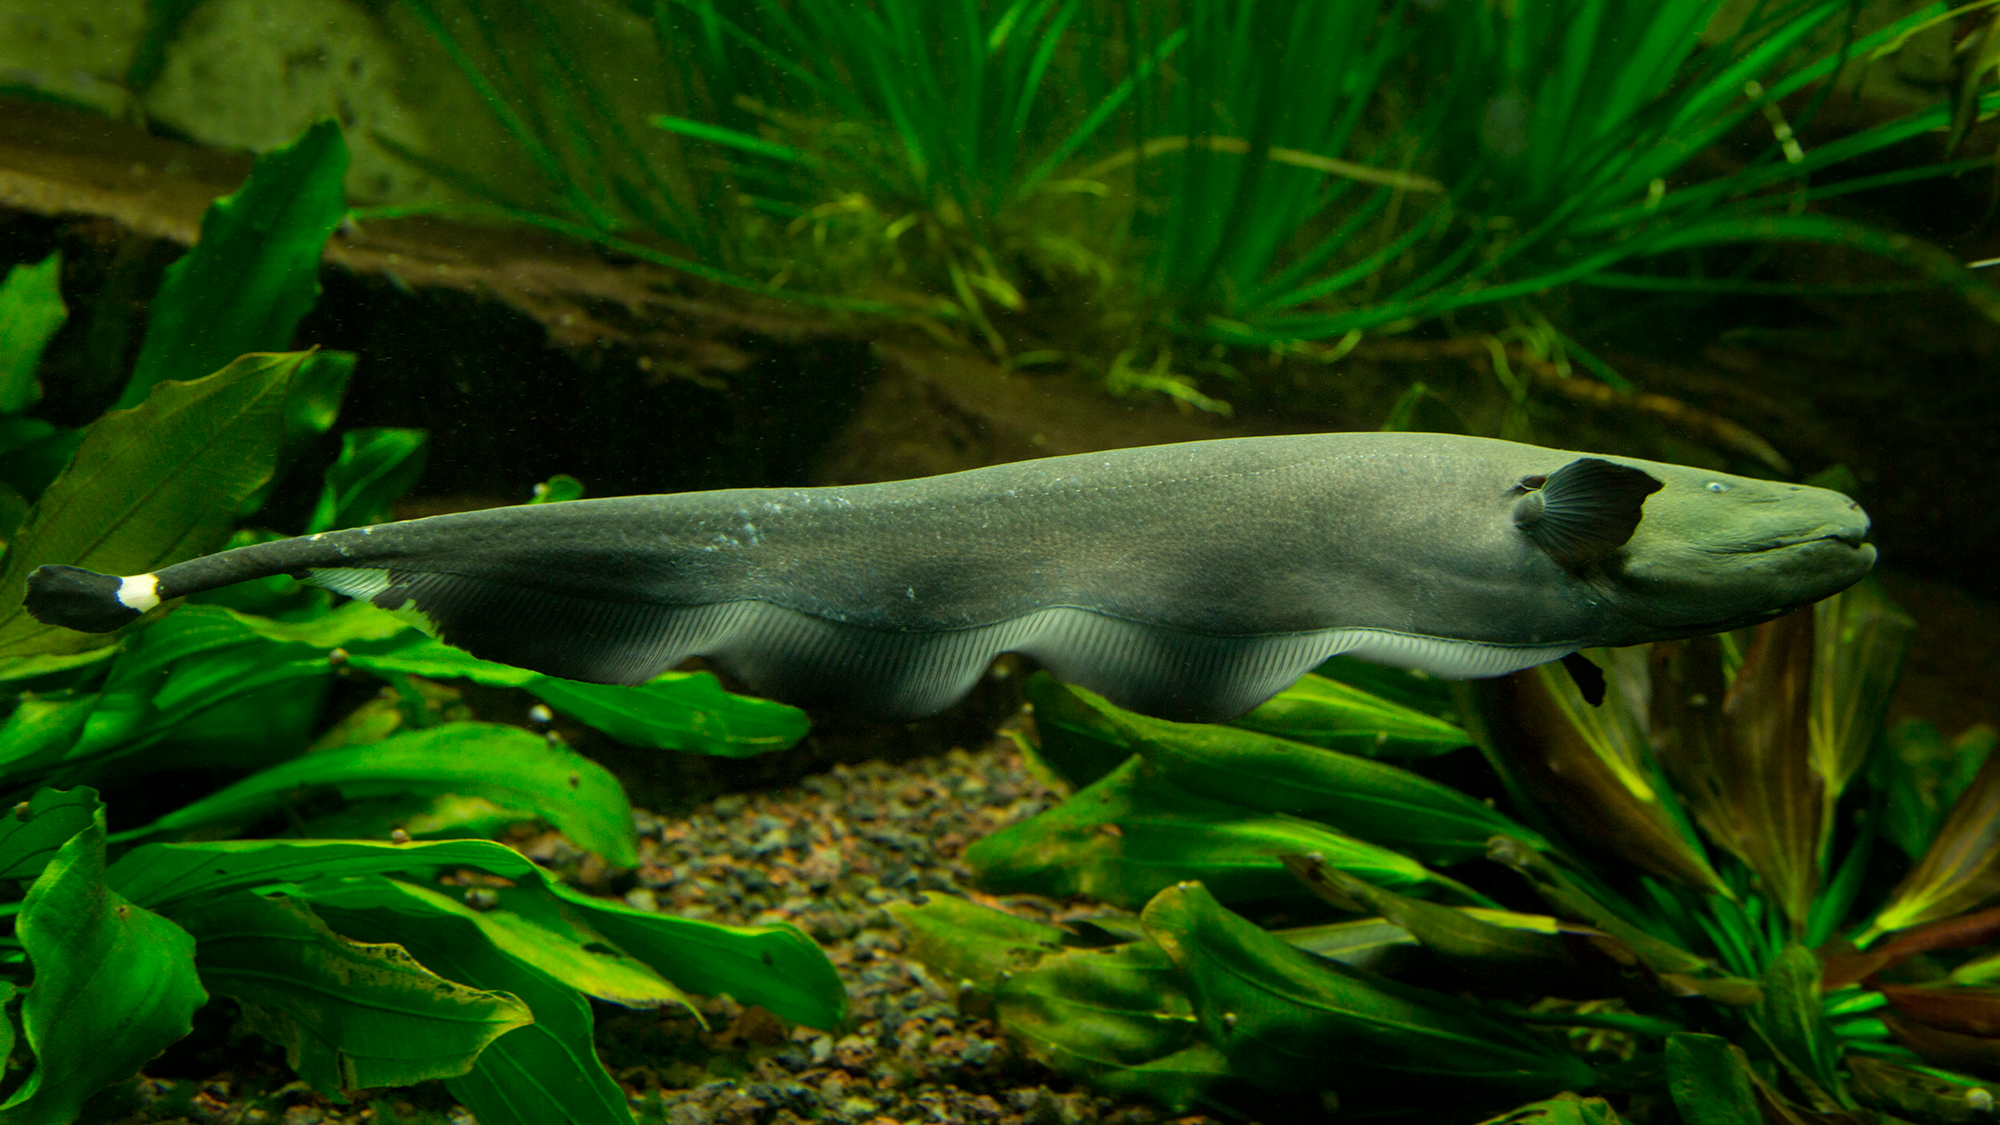 Why electric knifefish ‘shimmy’